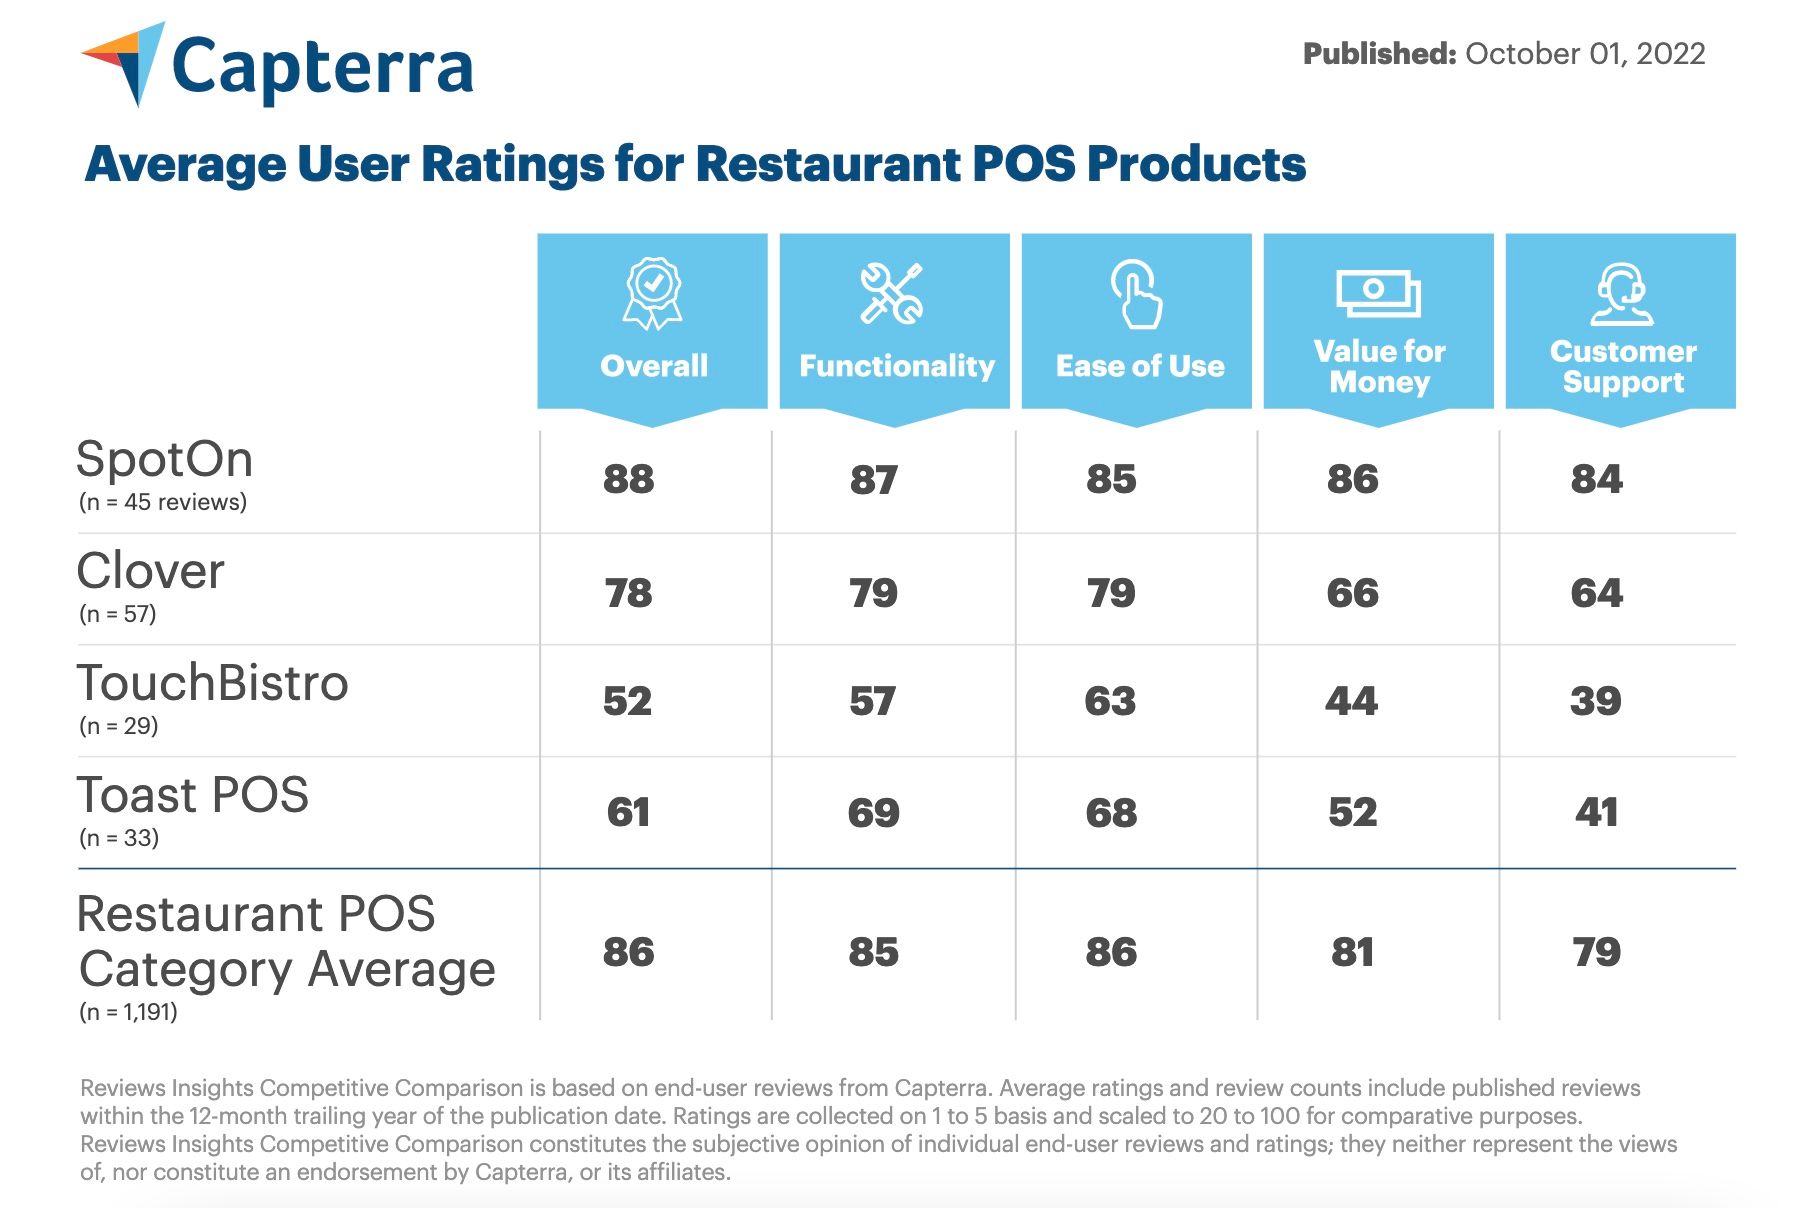 Capterra point of sale scores for SpotOn and TouchBistro competitors.